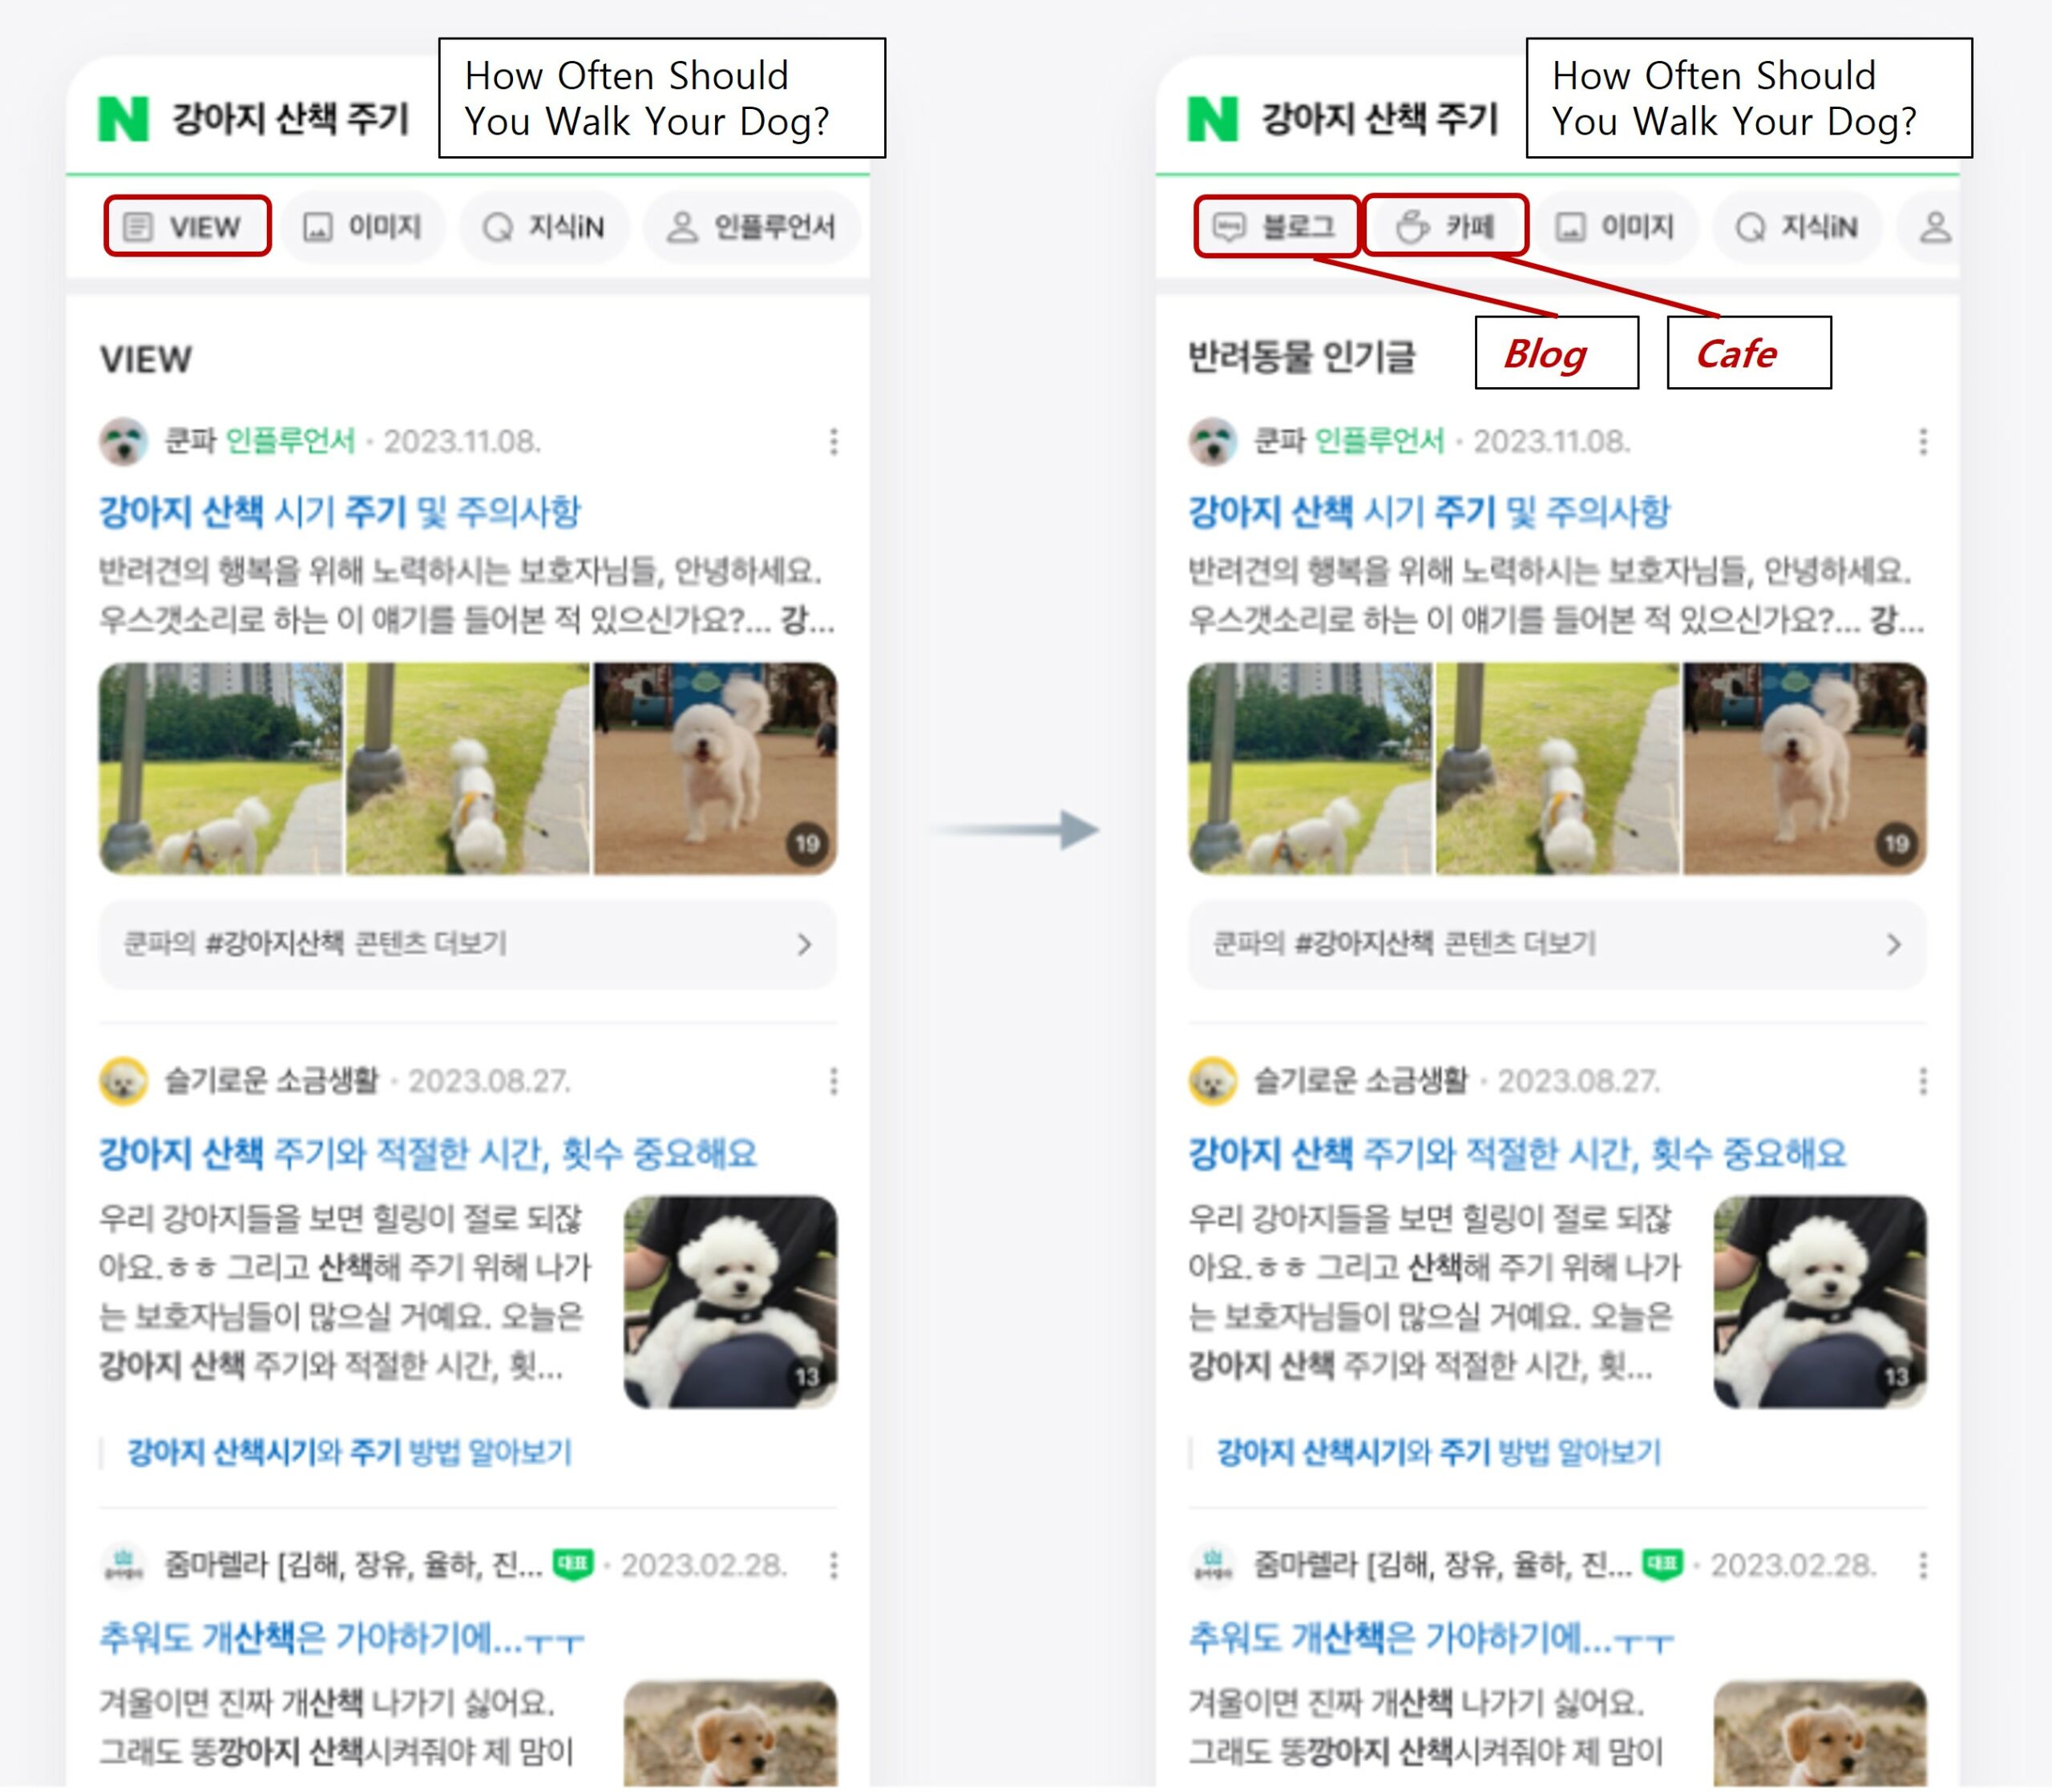 Naver VIEW switches to the blog and cafe tabs